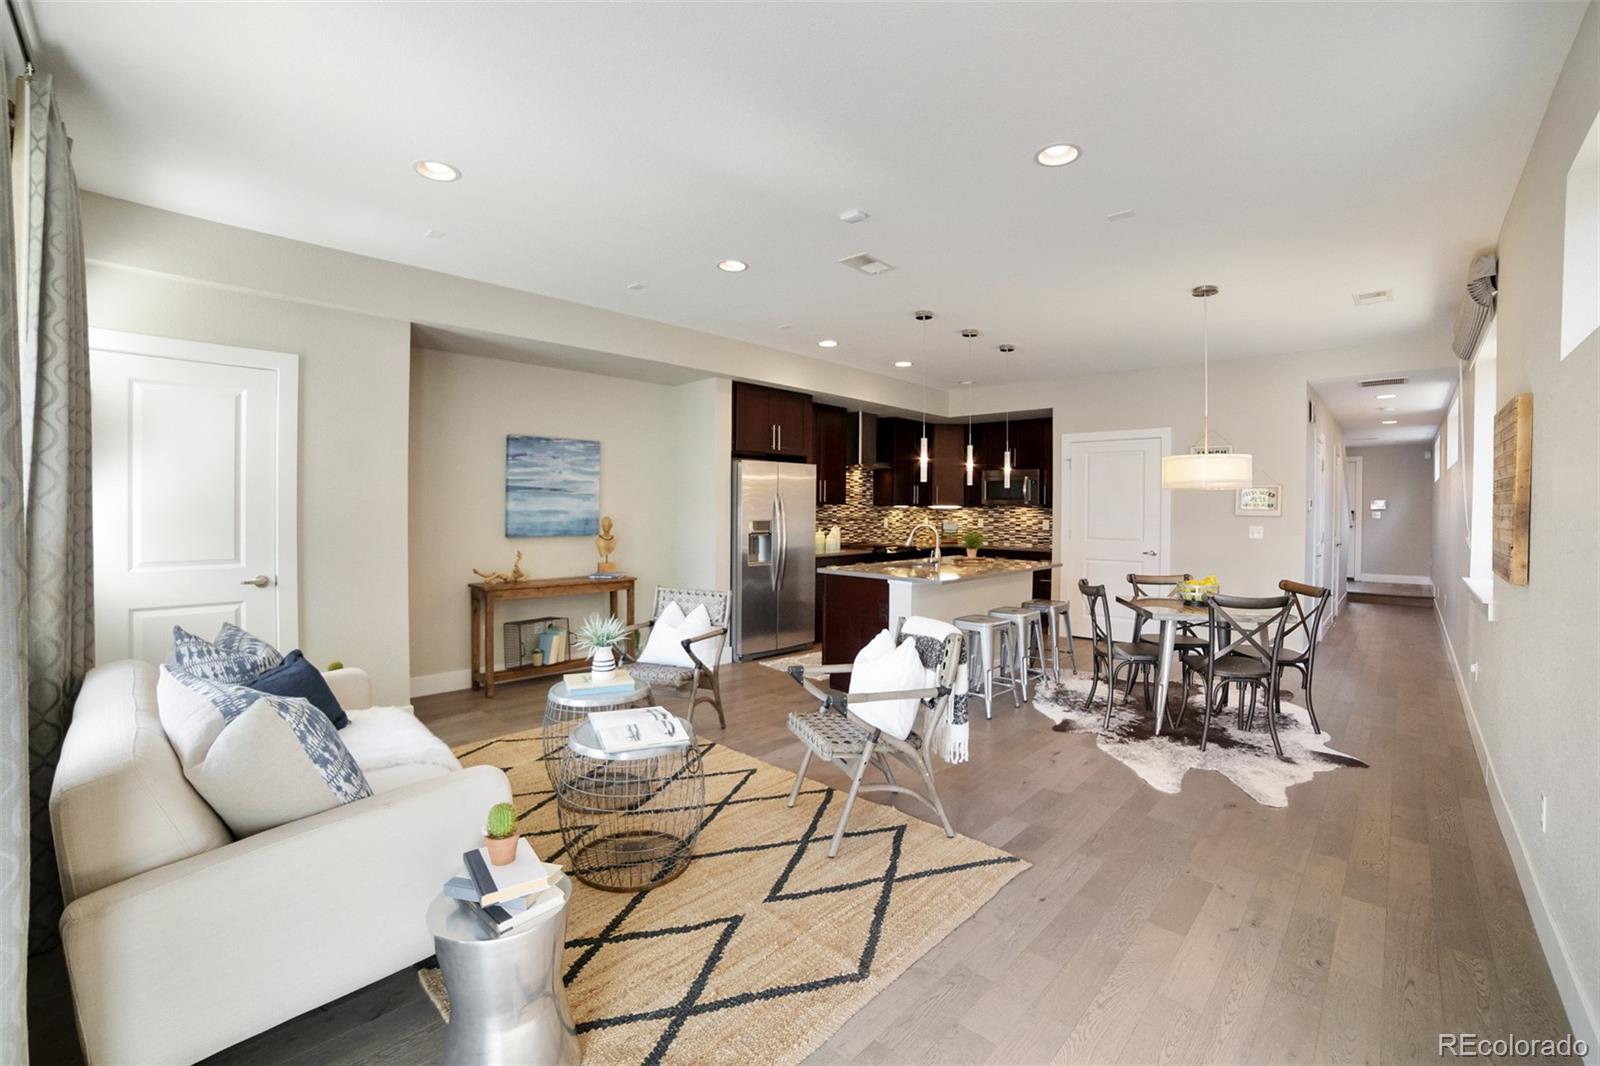 Open floor plan with gorgeous hardwood floors and tons of natural sunlight!